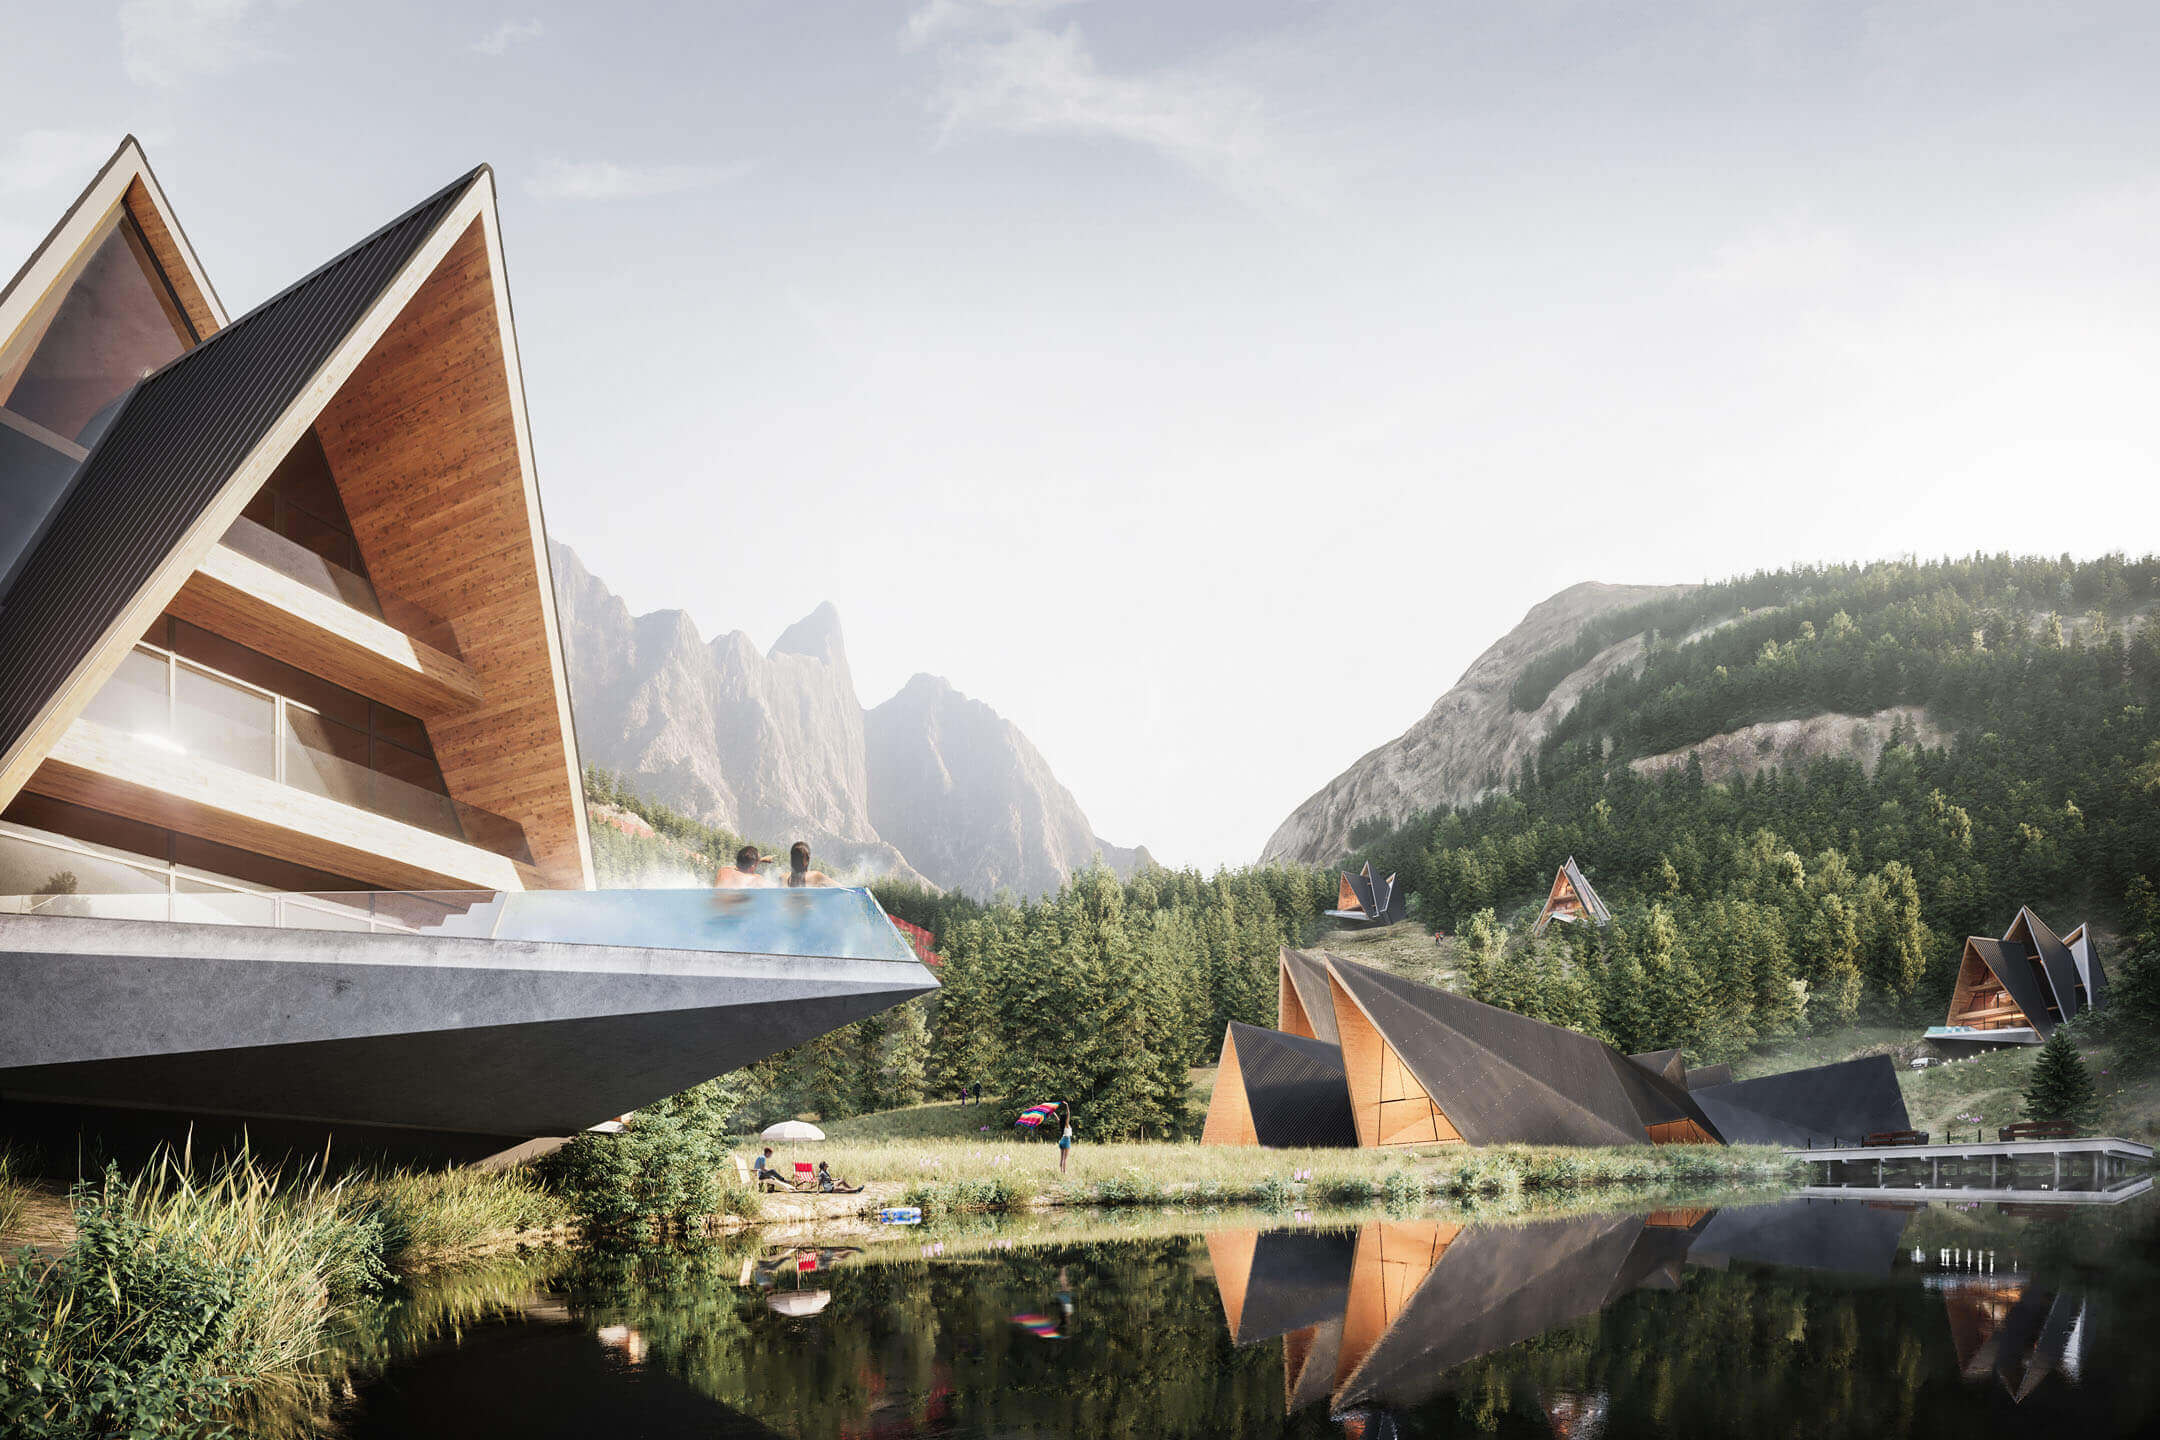 3D Visualization Of A Mountain Lakeside Resort